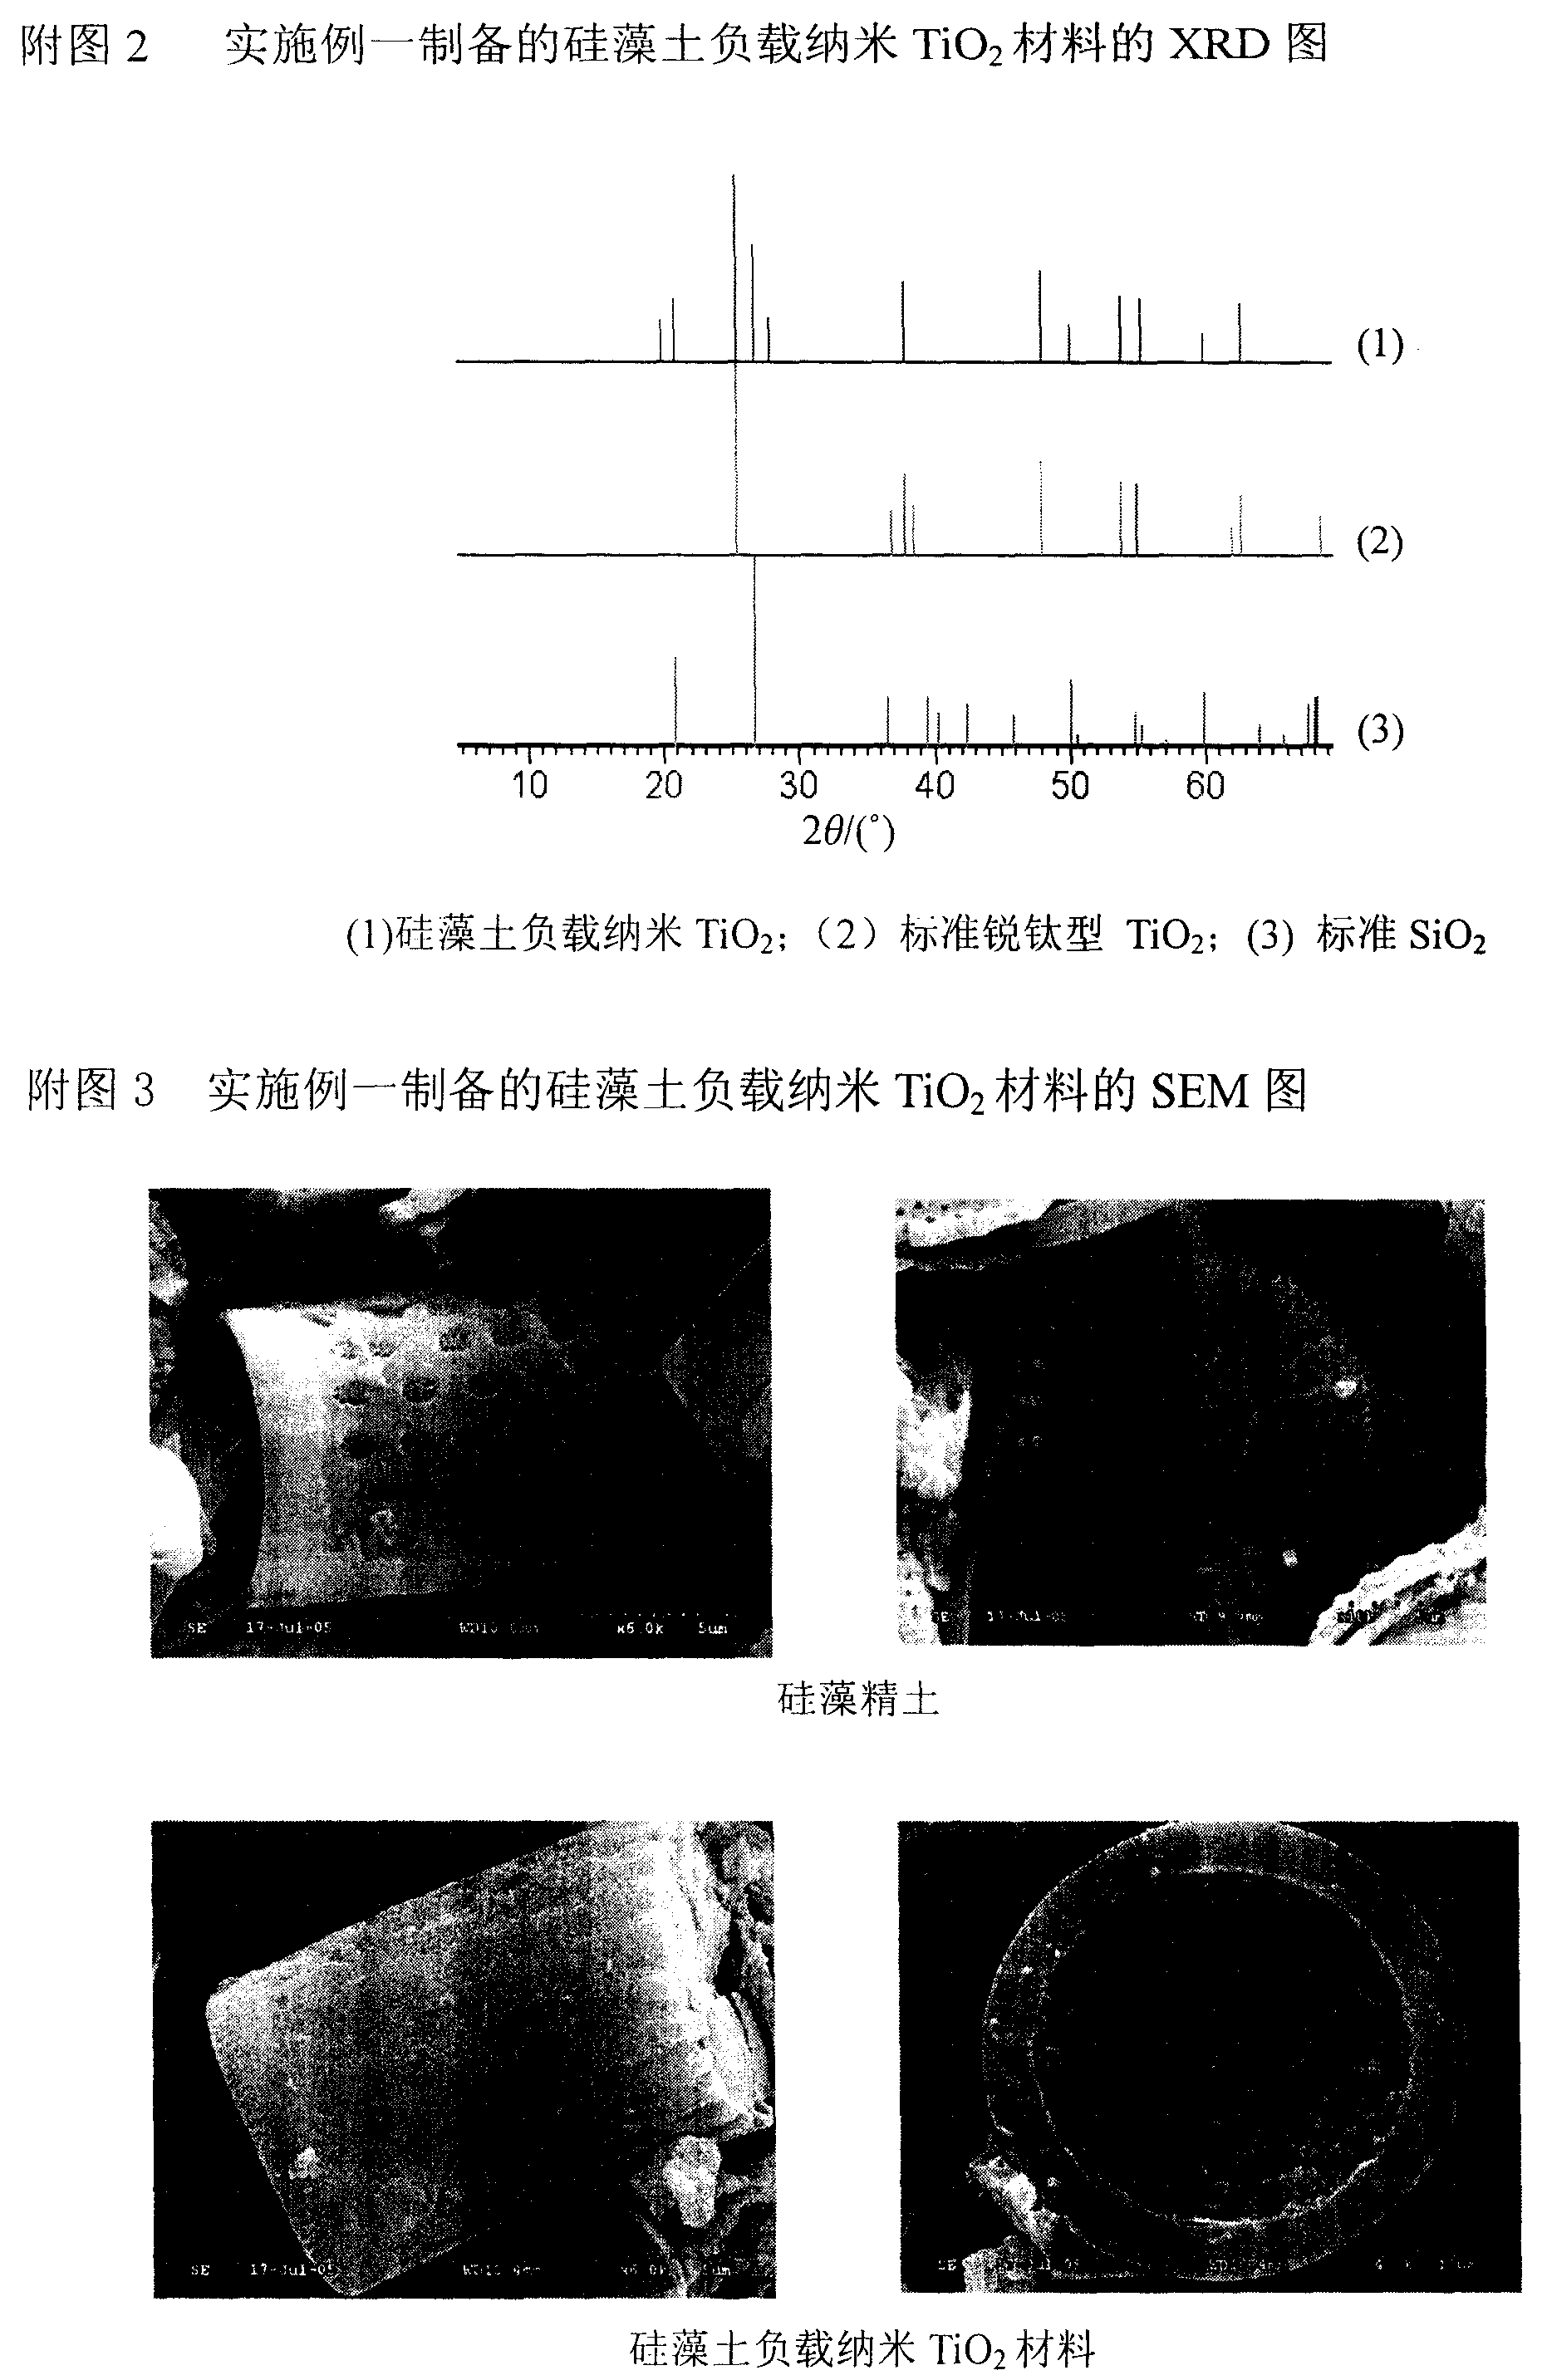 Method for producing tripolite loading nano-TIO2 material capable of being used for water and air purification